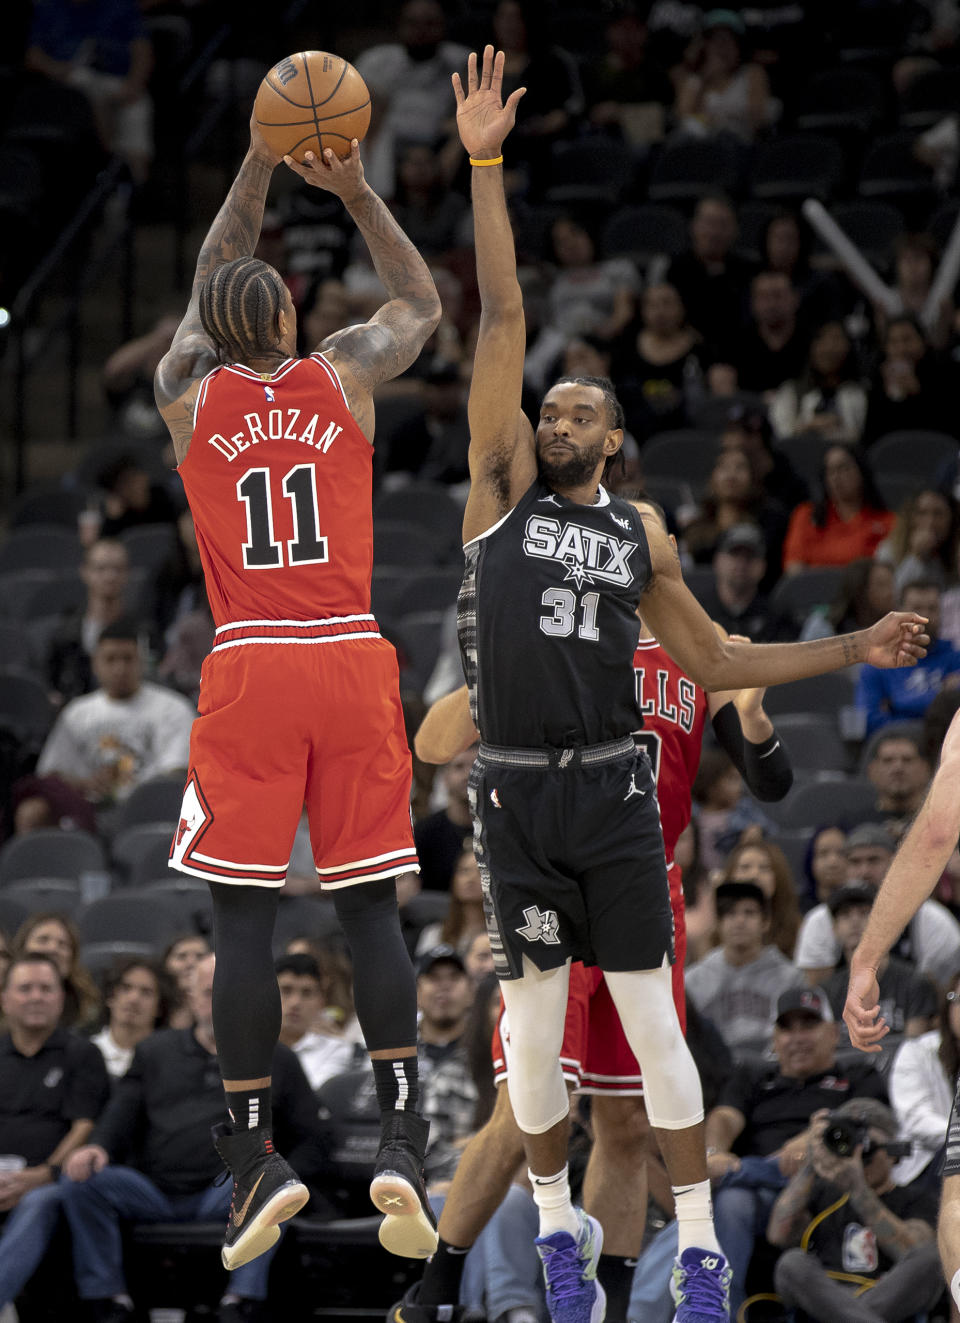 Chicago Bulls forward DeMar DeRozan (11) shoots over San Antonio Spurs forward Keita Bates-Diop (31) to score his 20,000th career point during the first half of an NBA basketball game, Friday, Oct. 28, 2022, in San Antonio. (AP Photo/Nick Wagner)